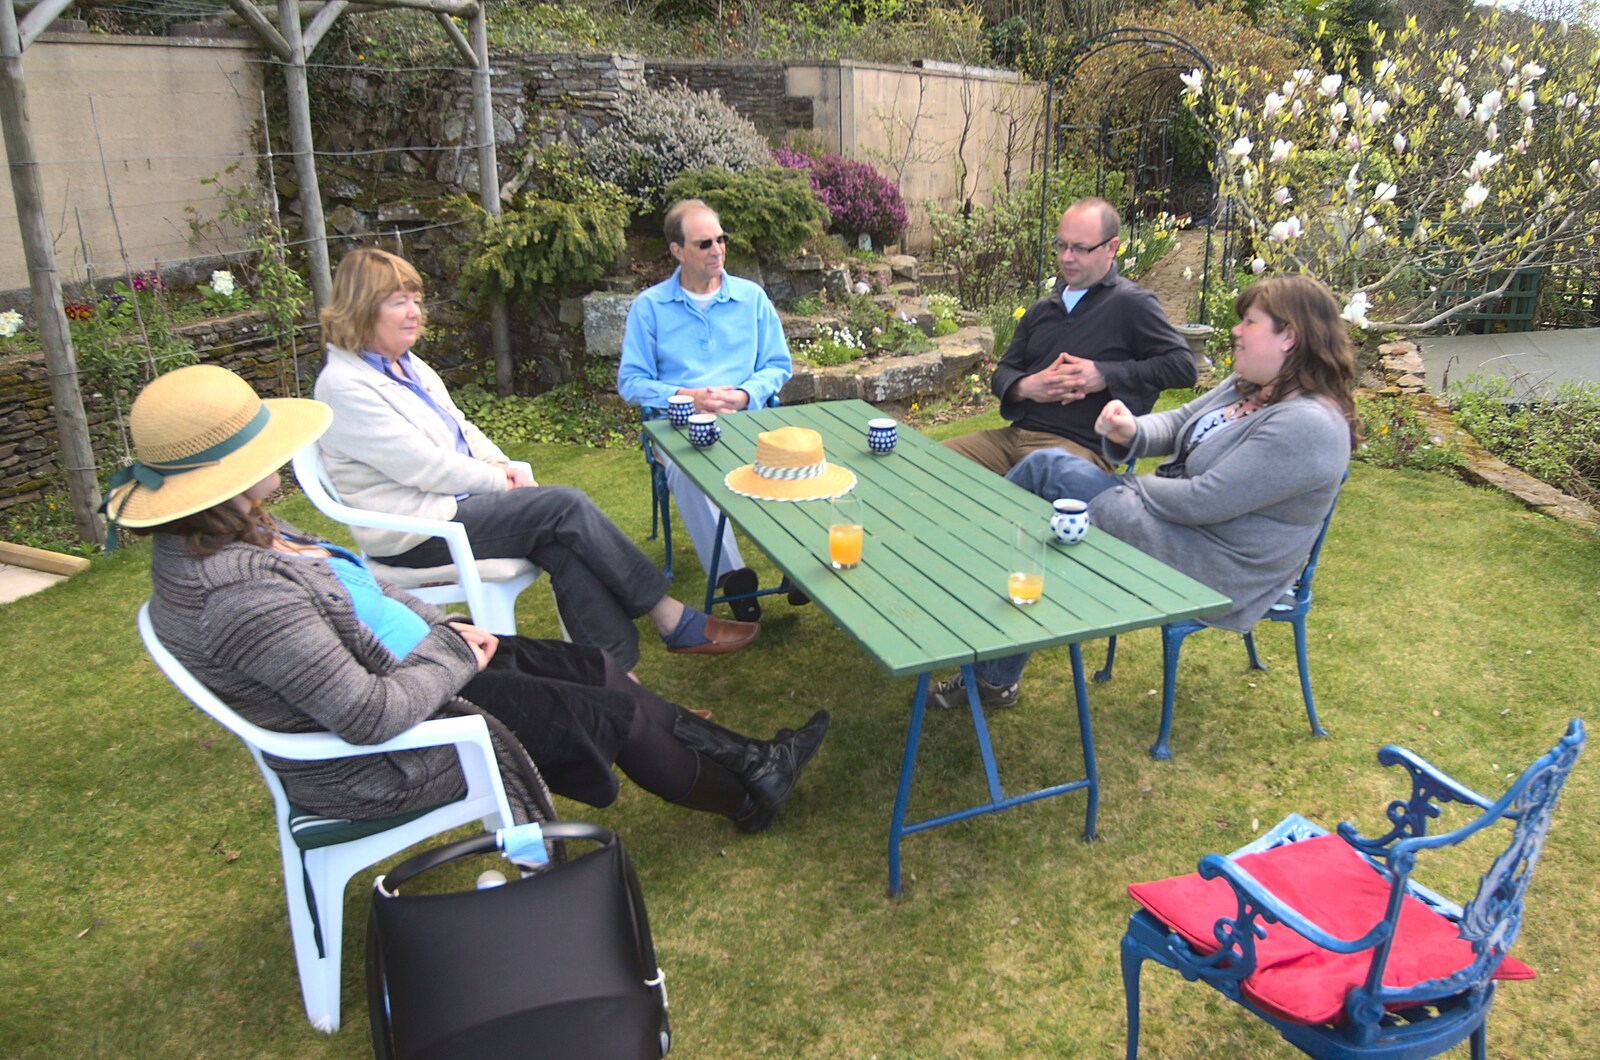 We have drinks up on the top lawn from An Easter Weekend in Chagford, Devon - 12th April 2009